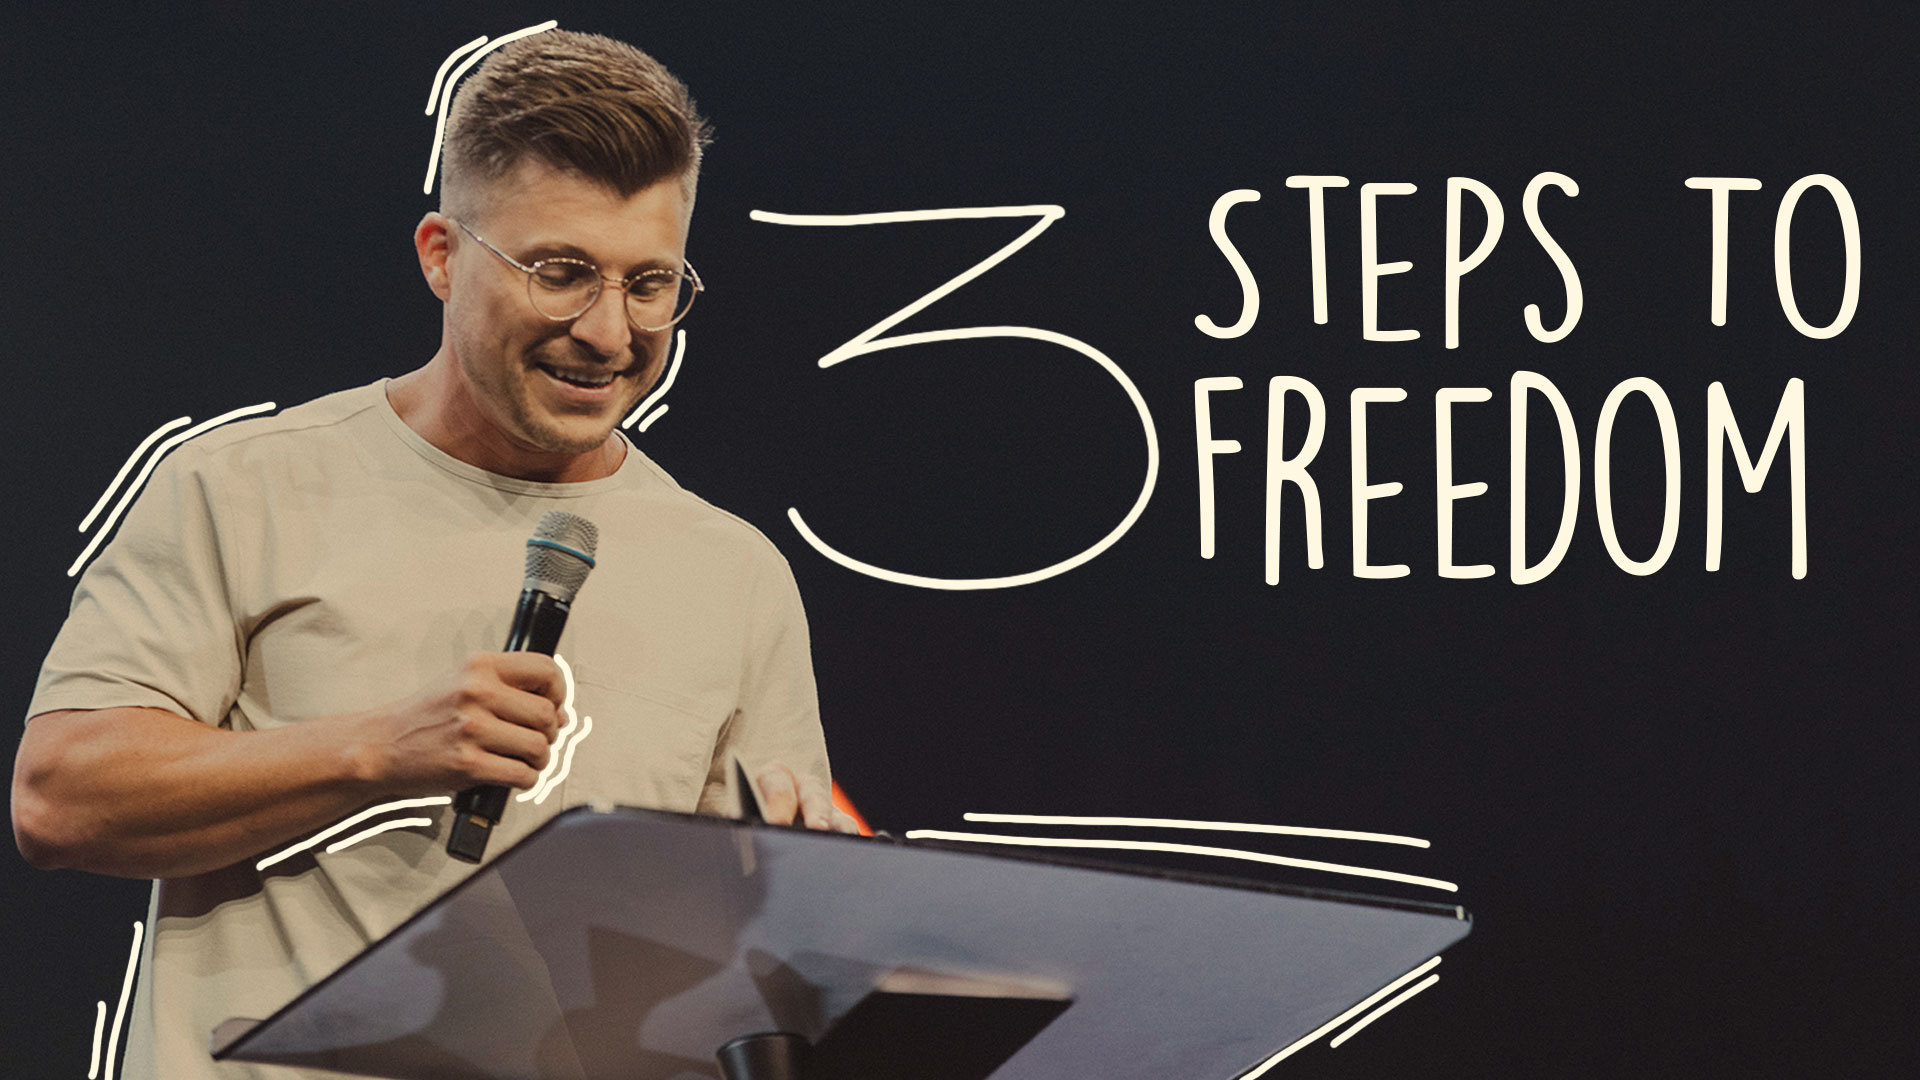 3 Steps to Freedom